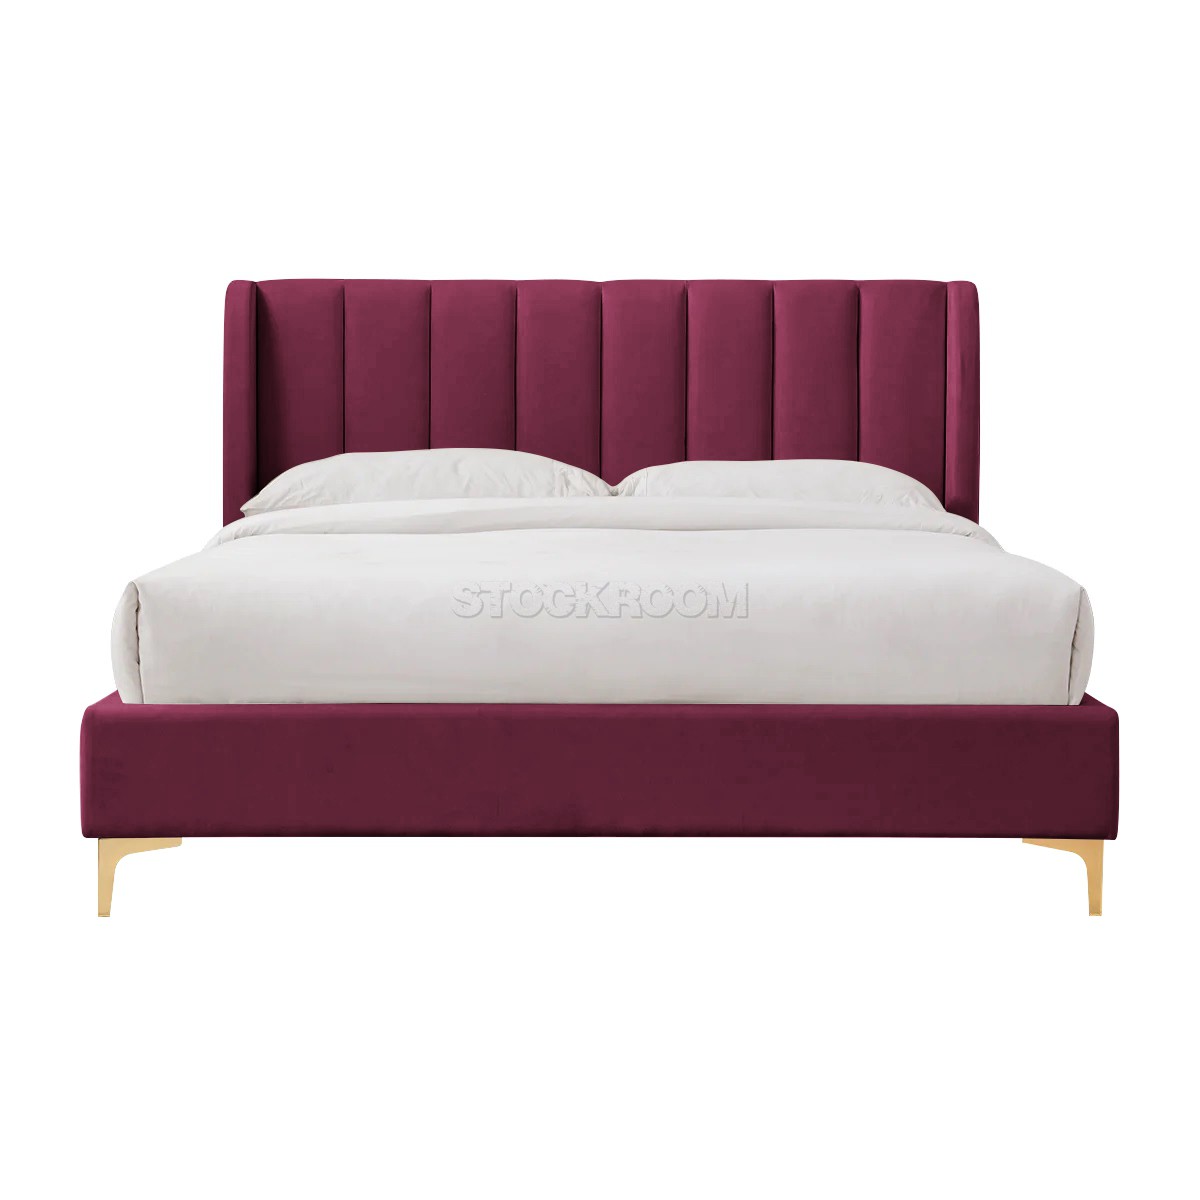 Athen Fabric Upholstered Bed Frame With Different Leg Color Options